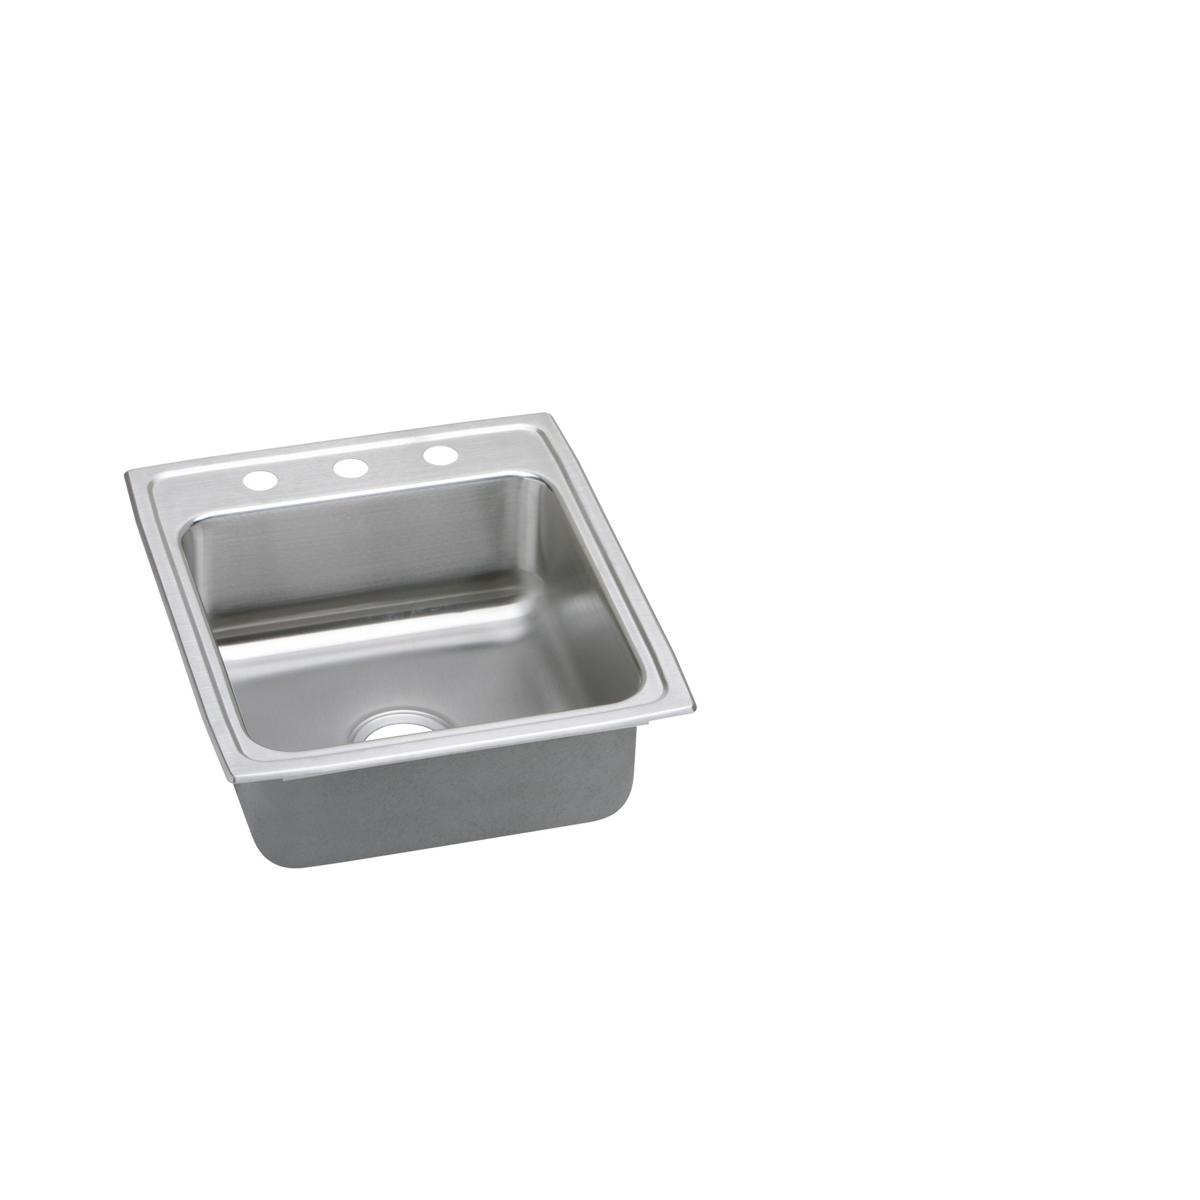 Elkay Lustertone Classic 19-1/2" x 22" x 6" MR2-Hole Single Bowl Drop-in ADA Sink with Quick-clip